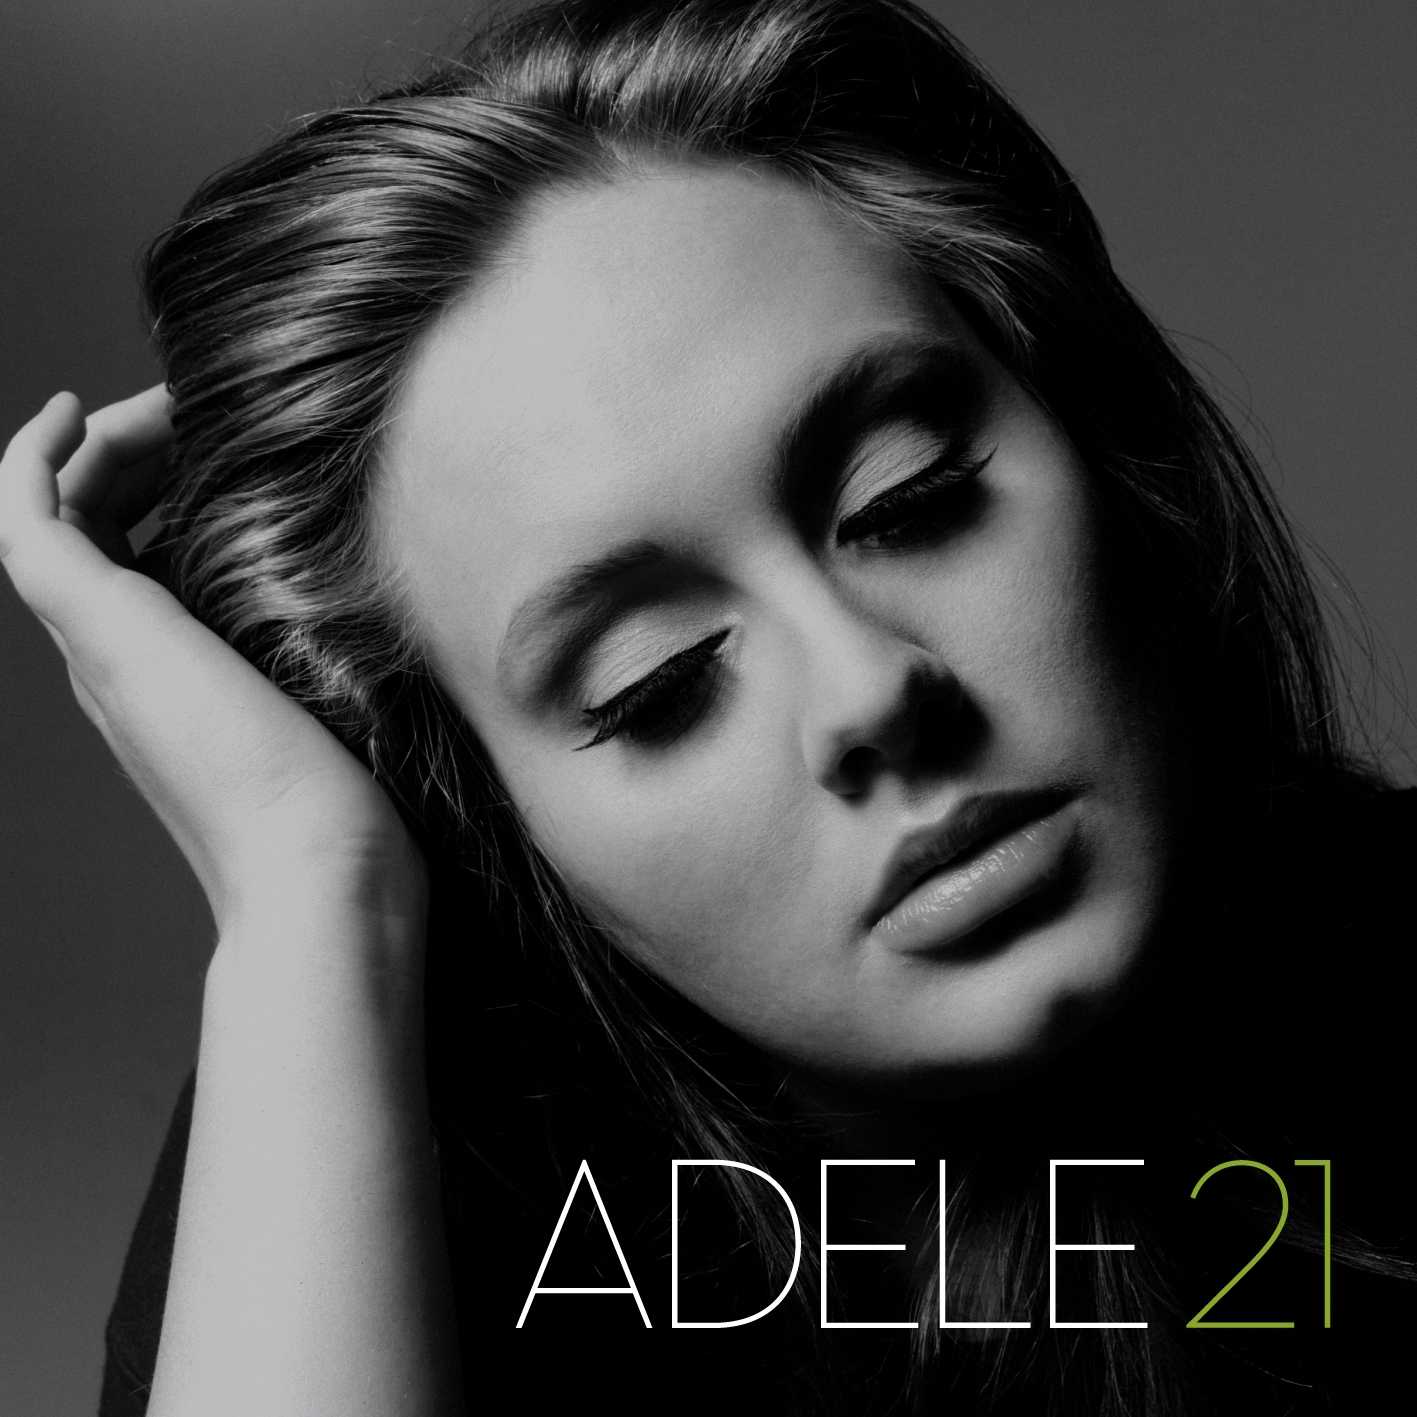 Spot On The Covers!: Adele - 21 (Official Album Cover)